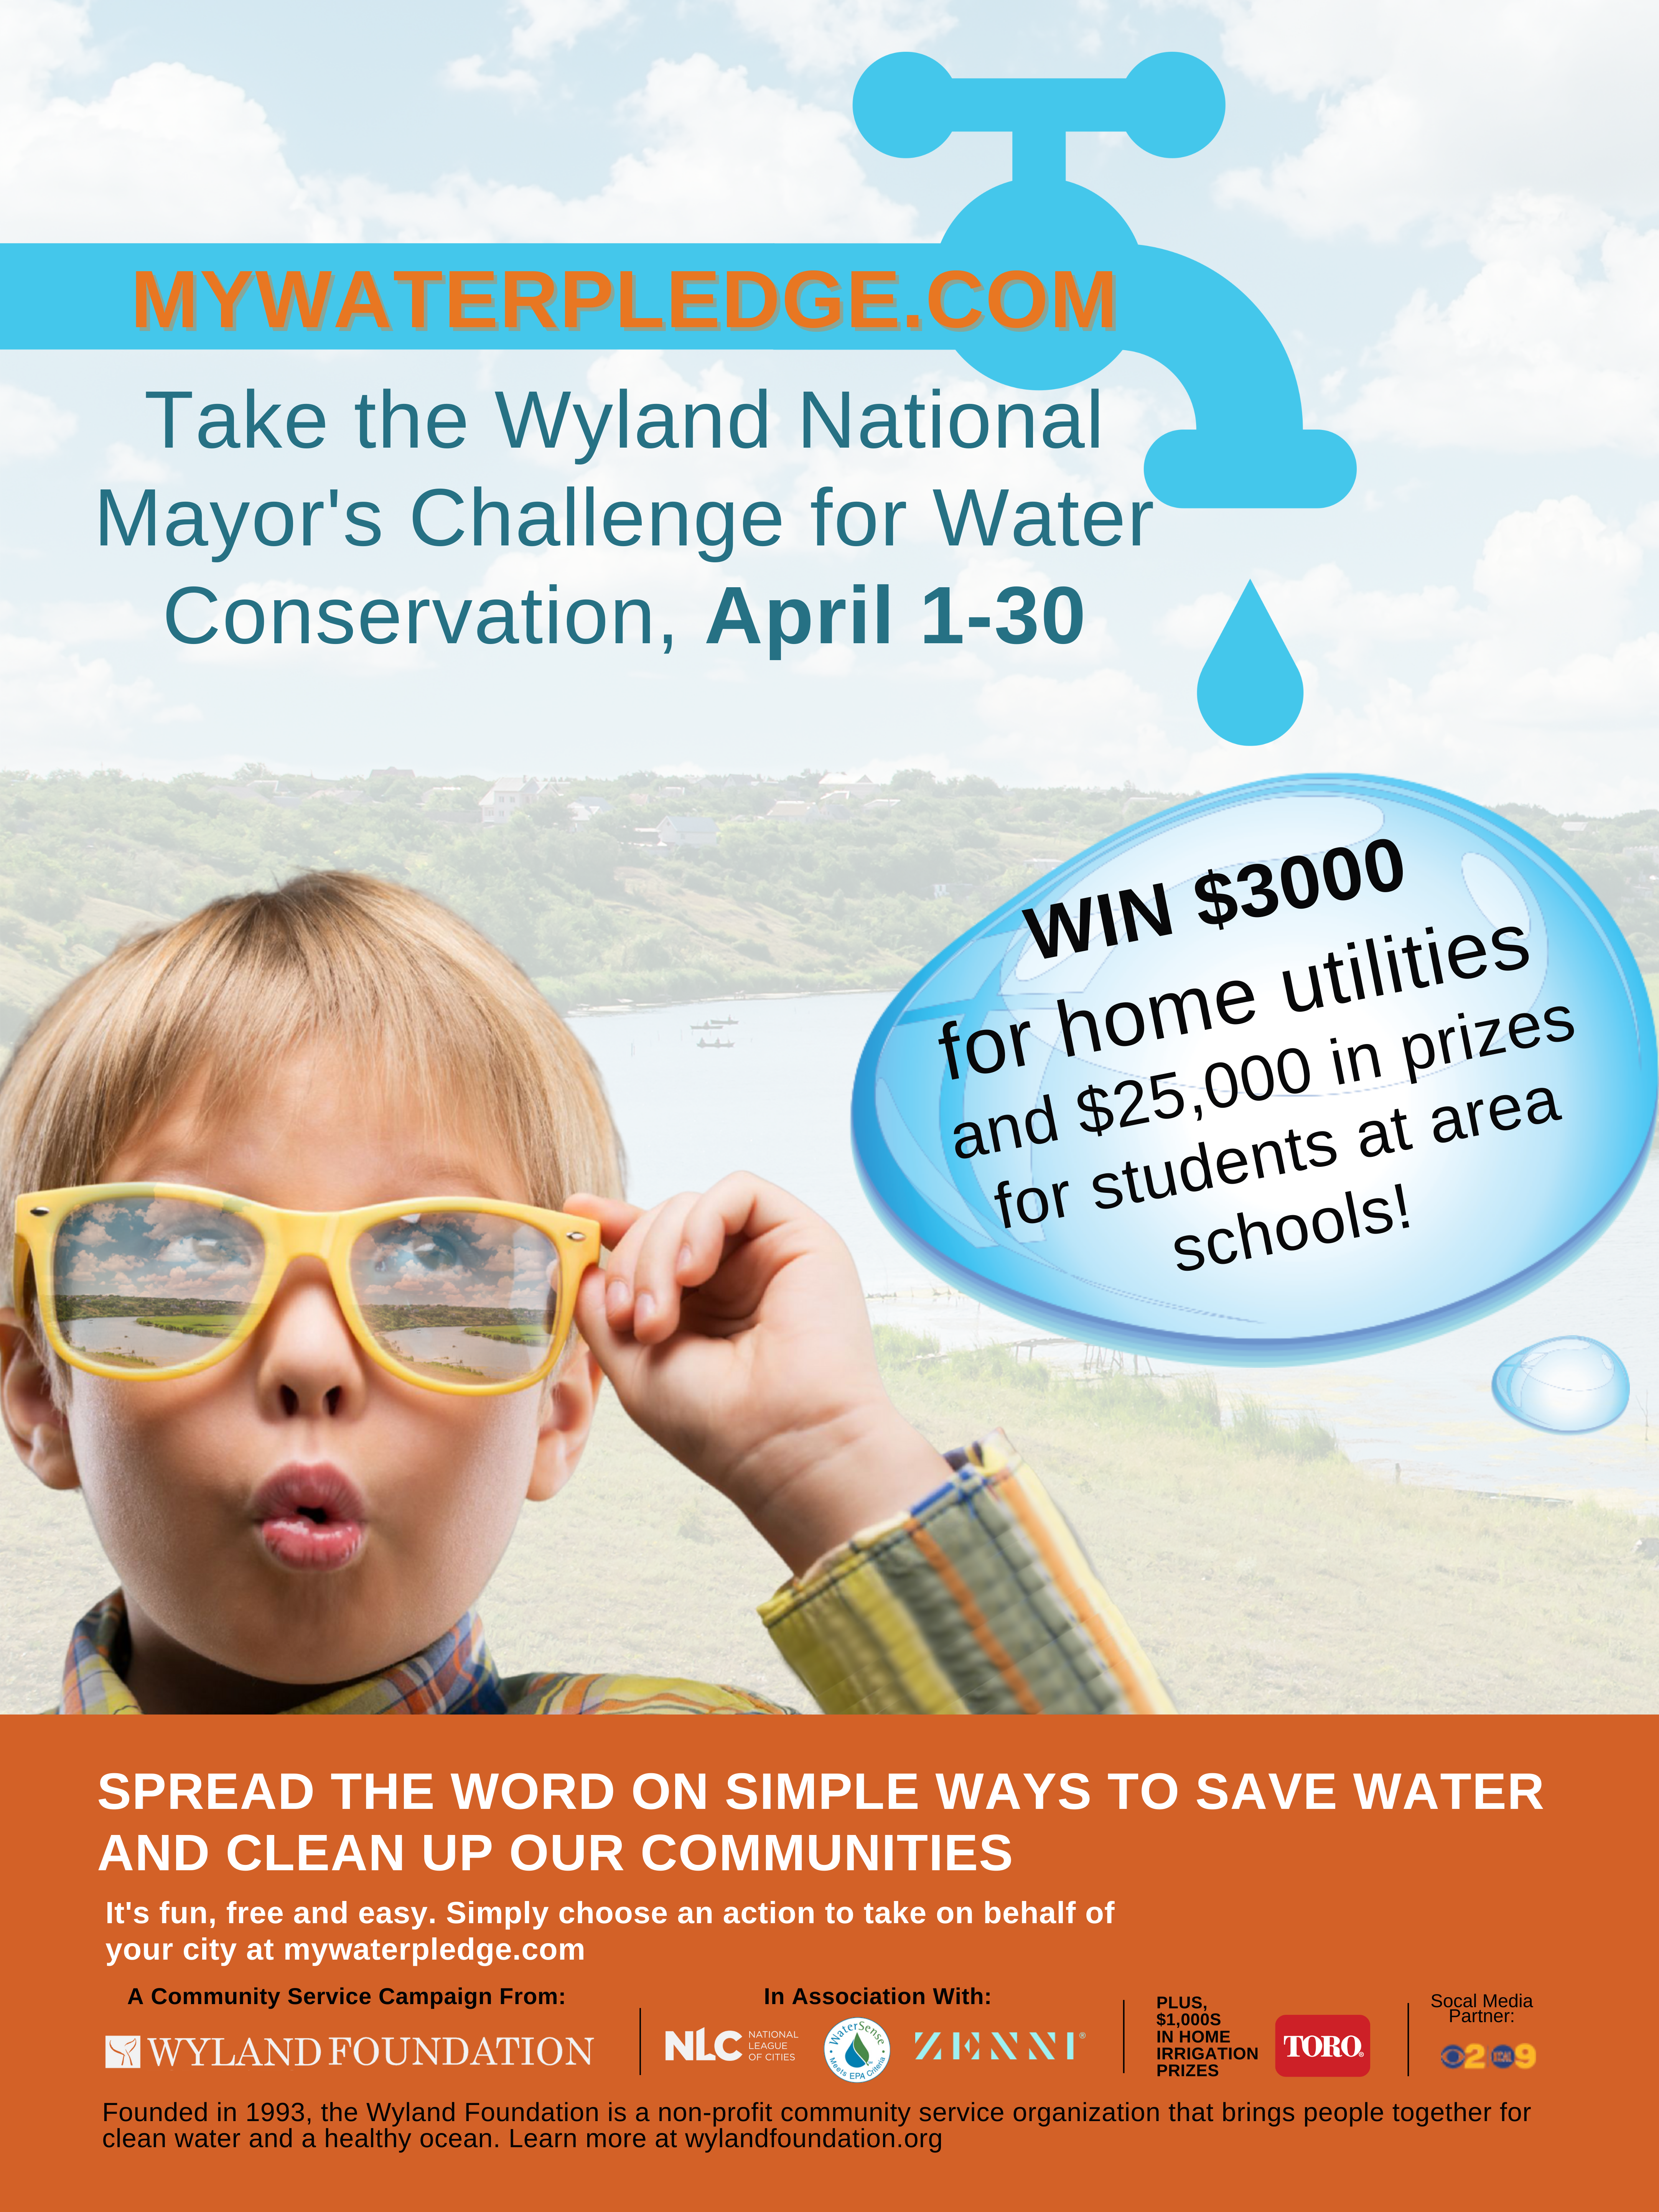 https://www.mywaterpledge.com/files/NMC%20Poster%201.png